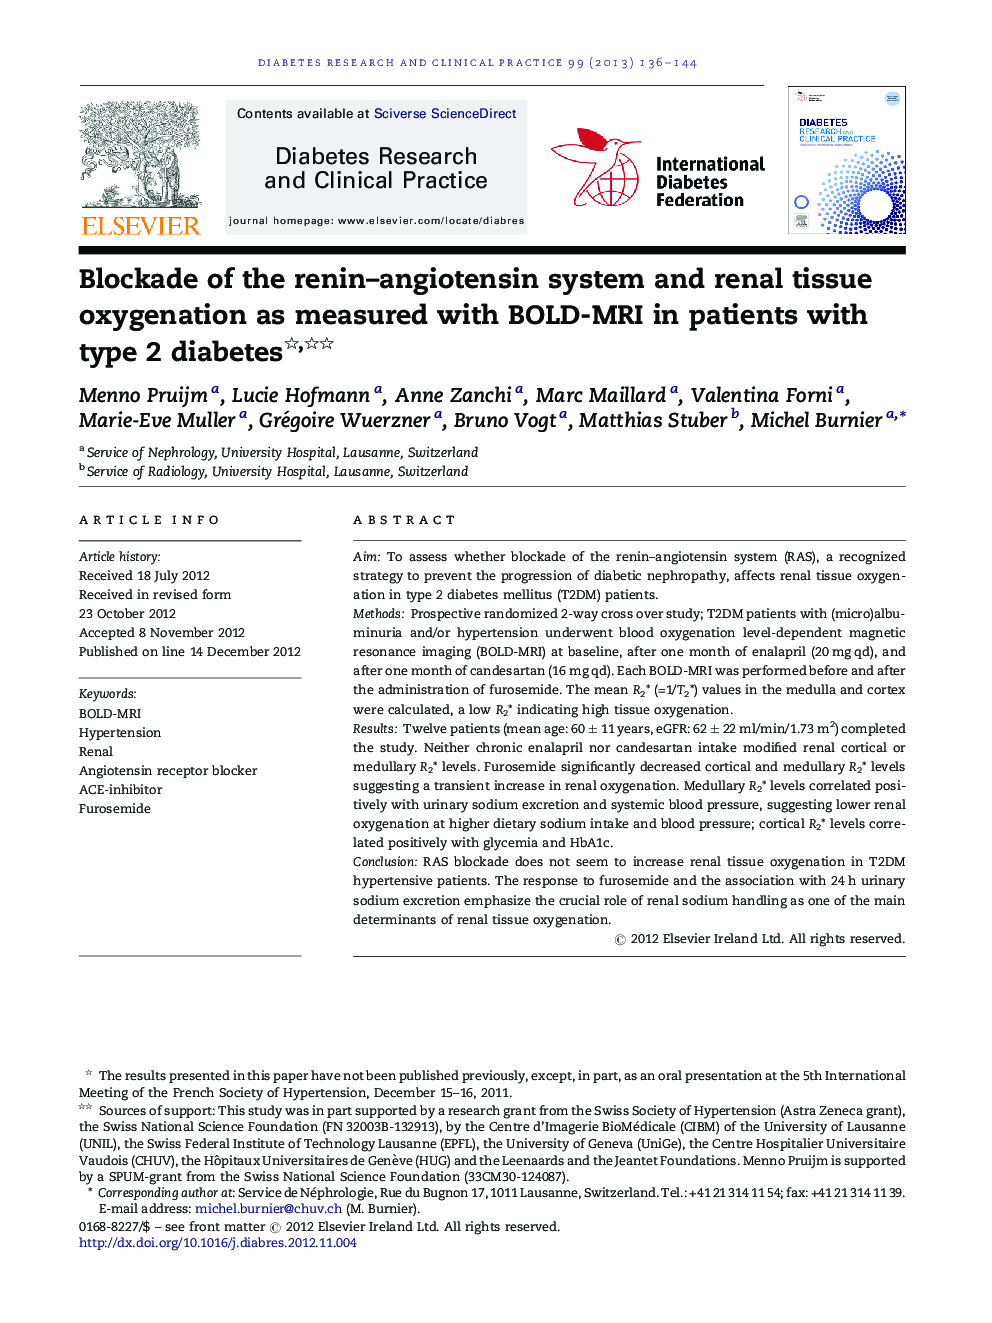 Blockade of the renin-angiotensin system and renal tissue oxygenation as measured with BOLD-MRI in patients with type 2 diabetes